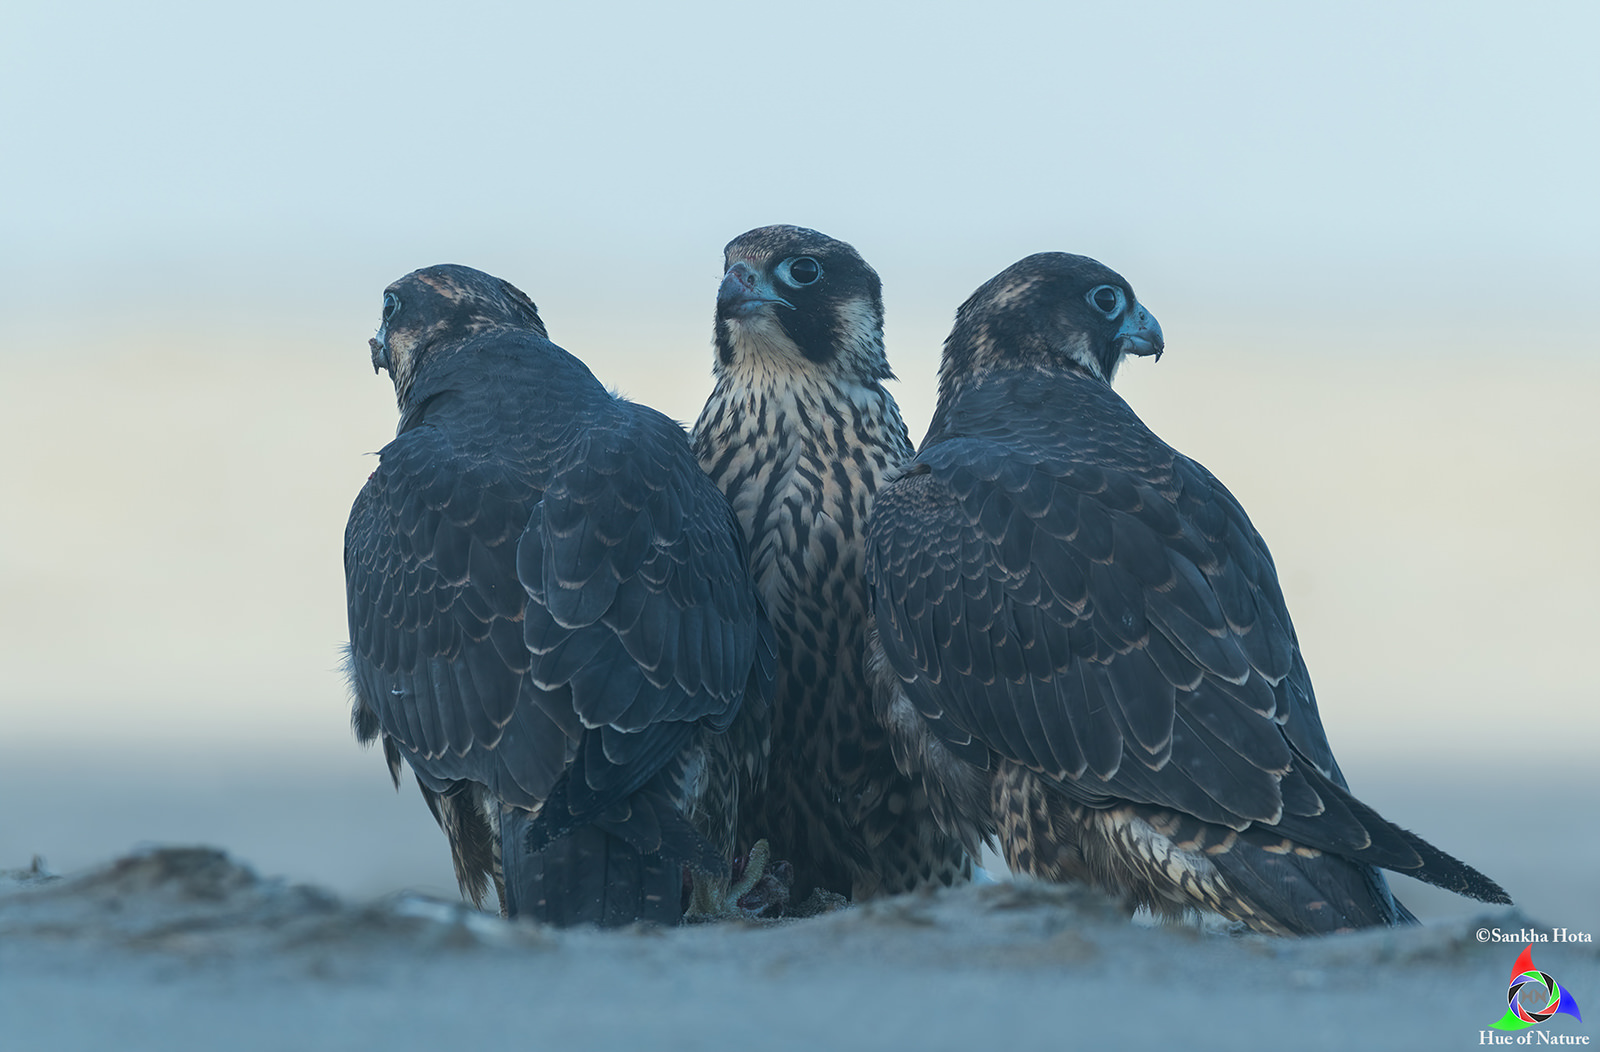 Sand, Sea and Peregrines